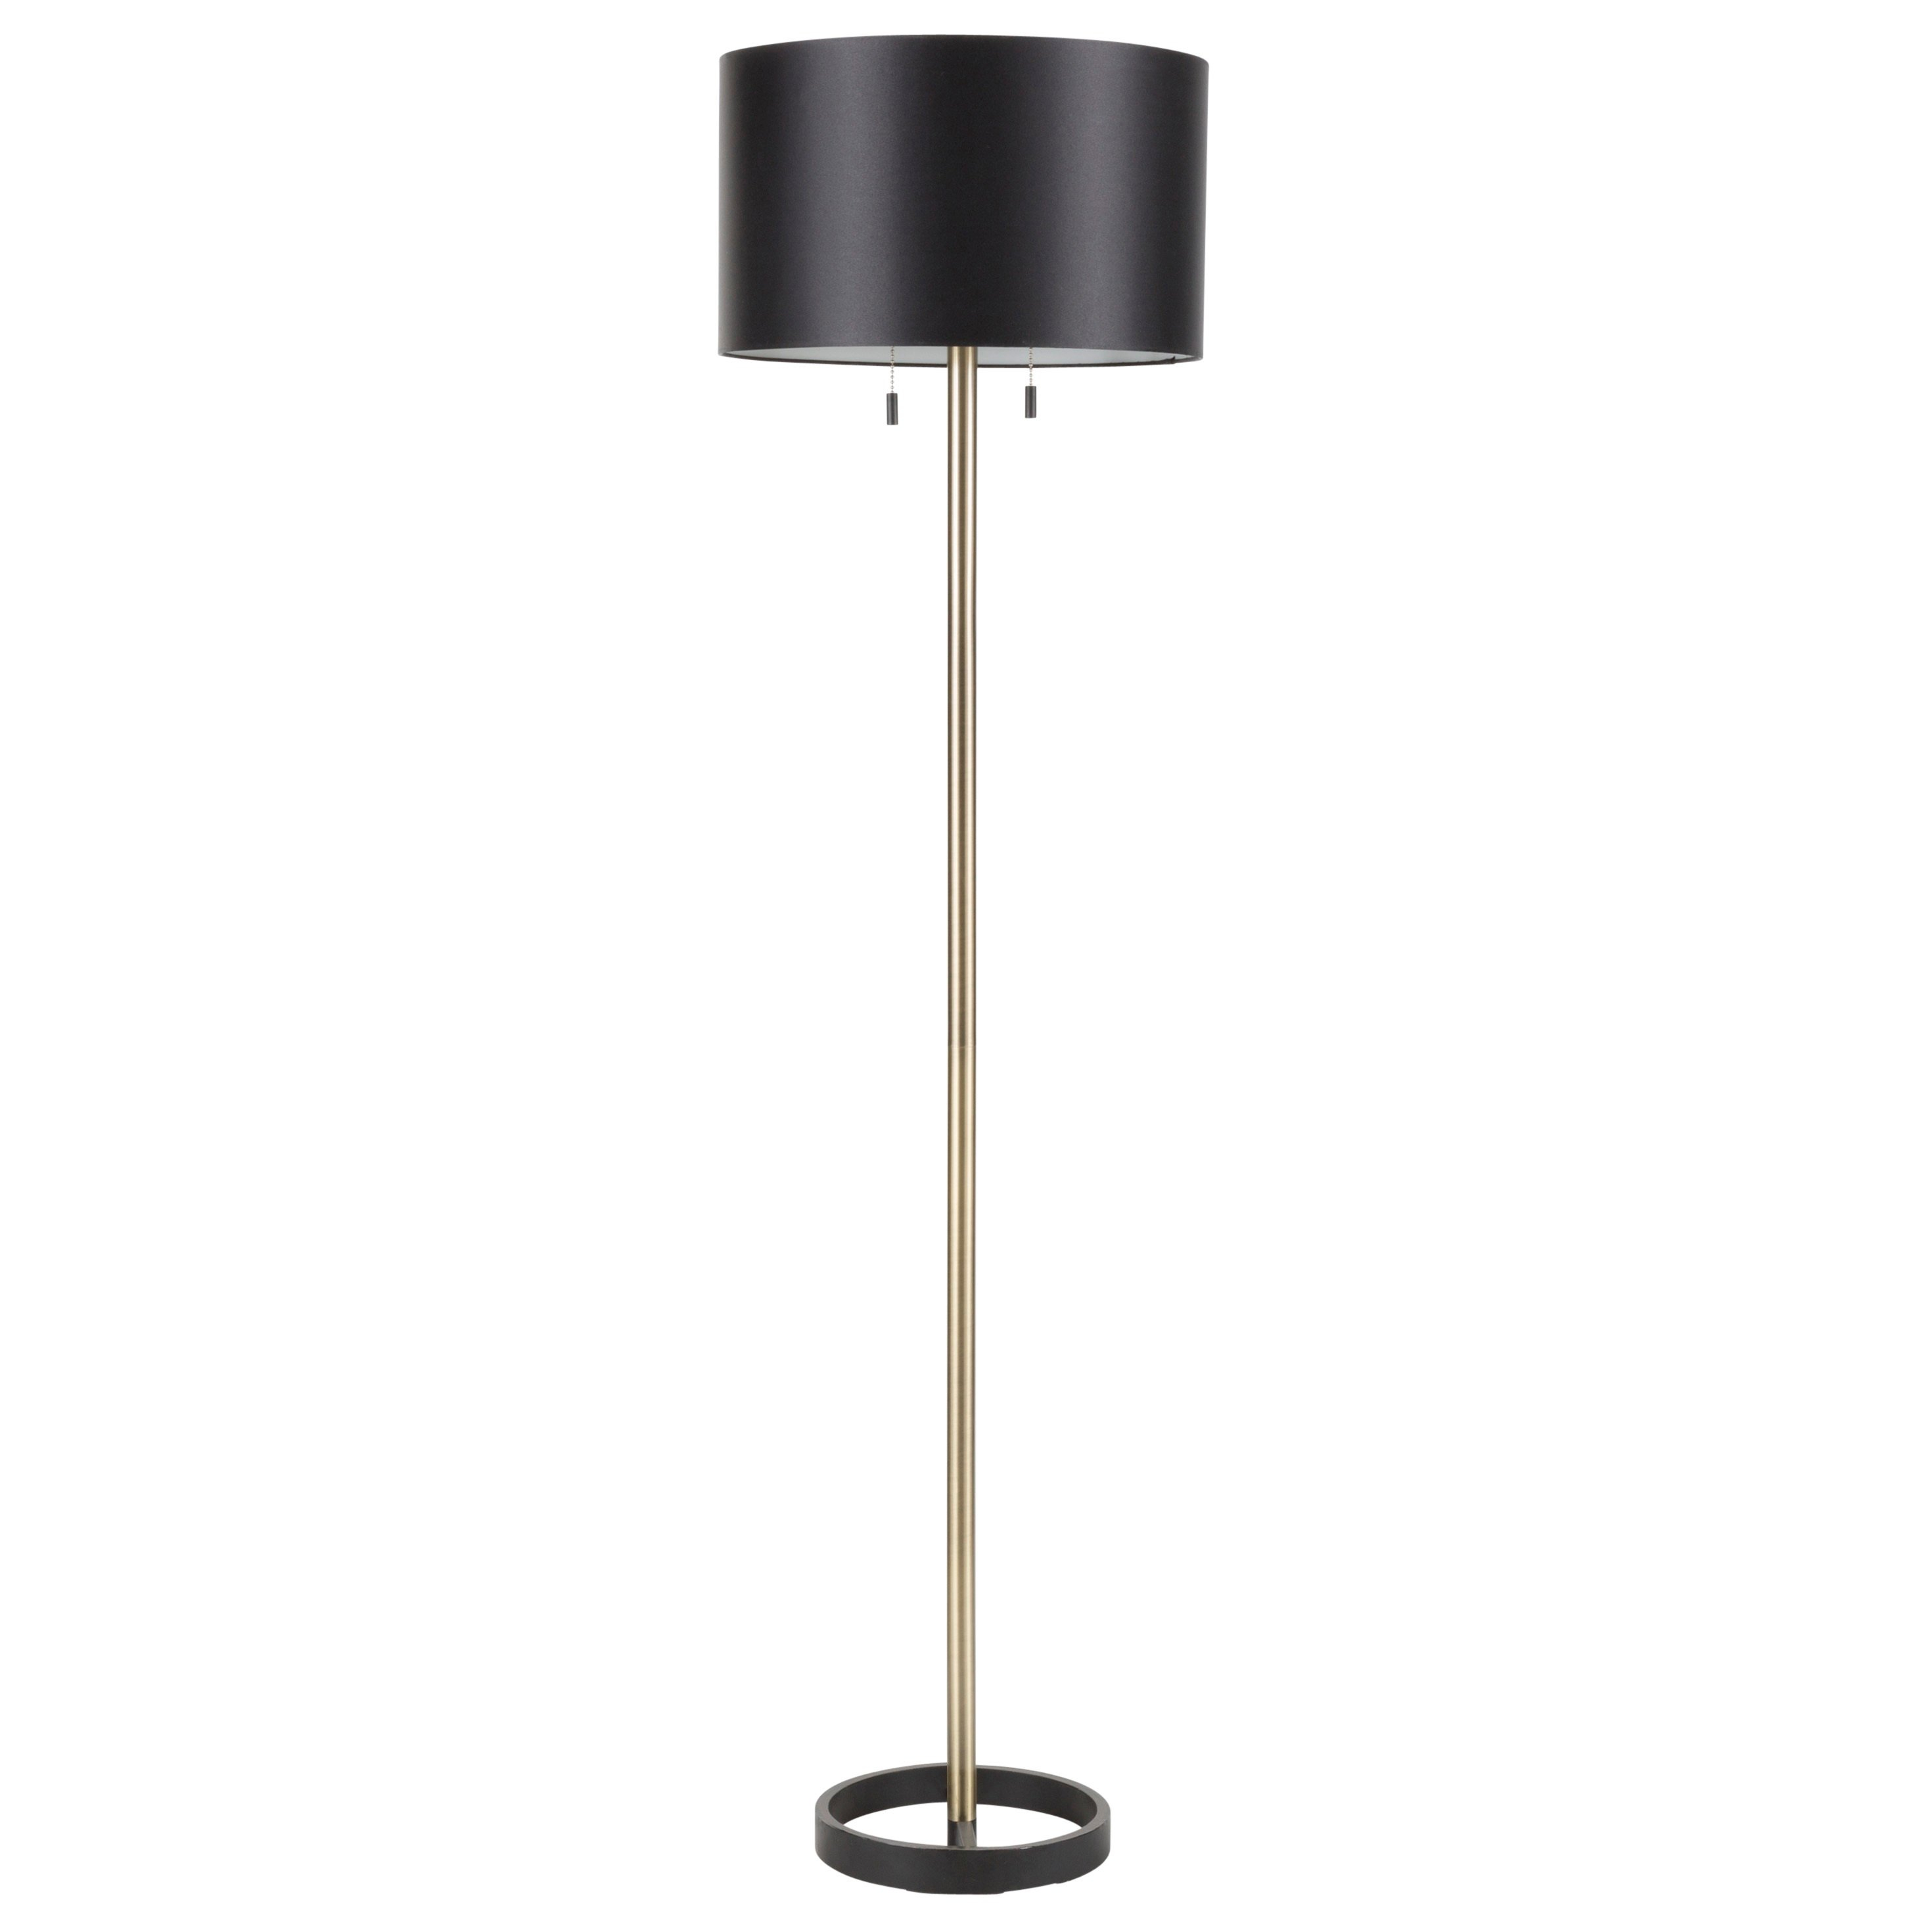 Contemporary Black Floor Lamp With Gold Accents Hilton throughout proportions 2940 X 2940